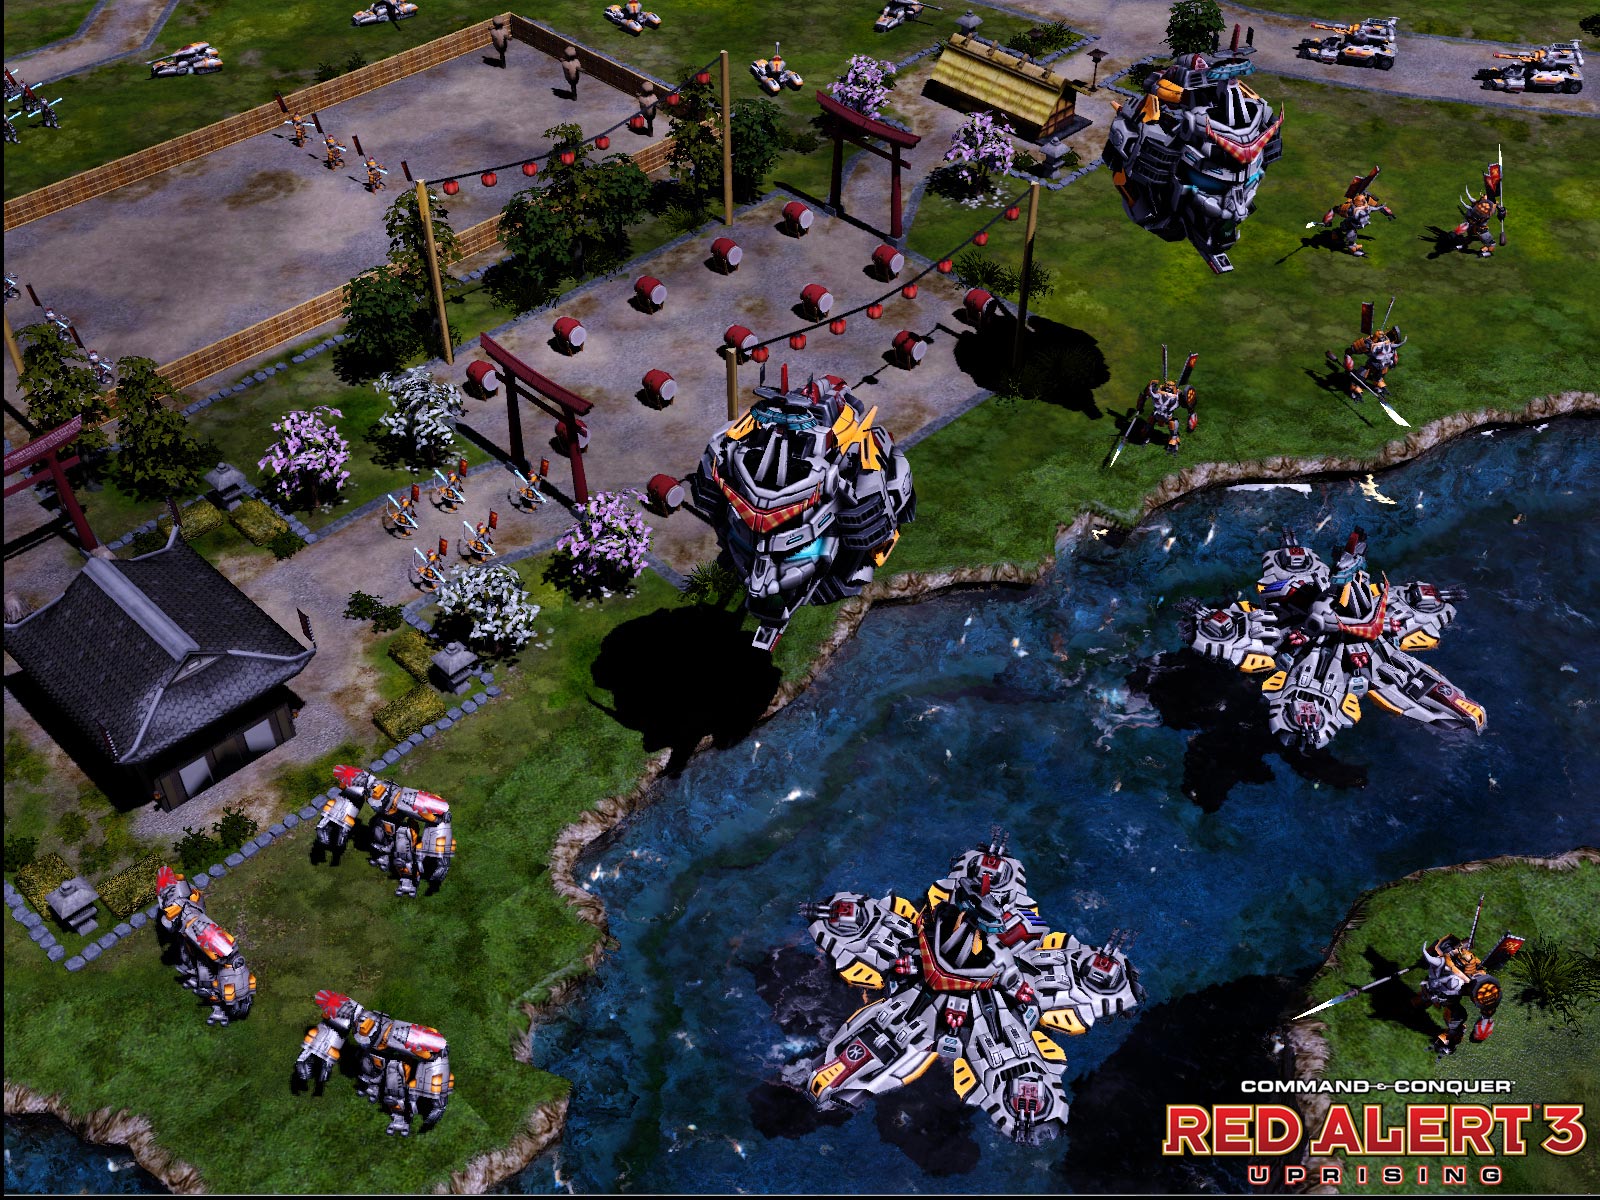 Command & Conquer Red Alert 3  Uprising